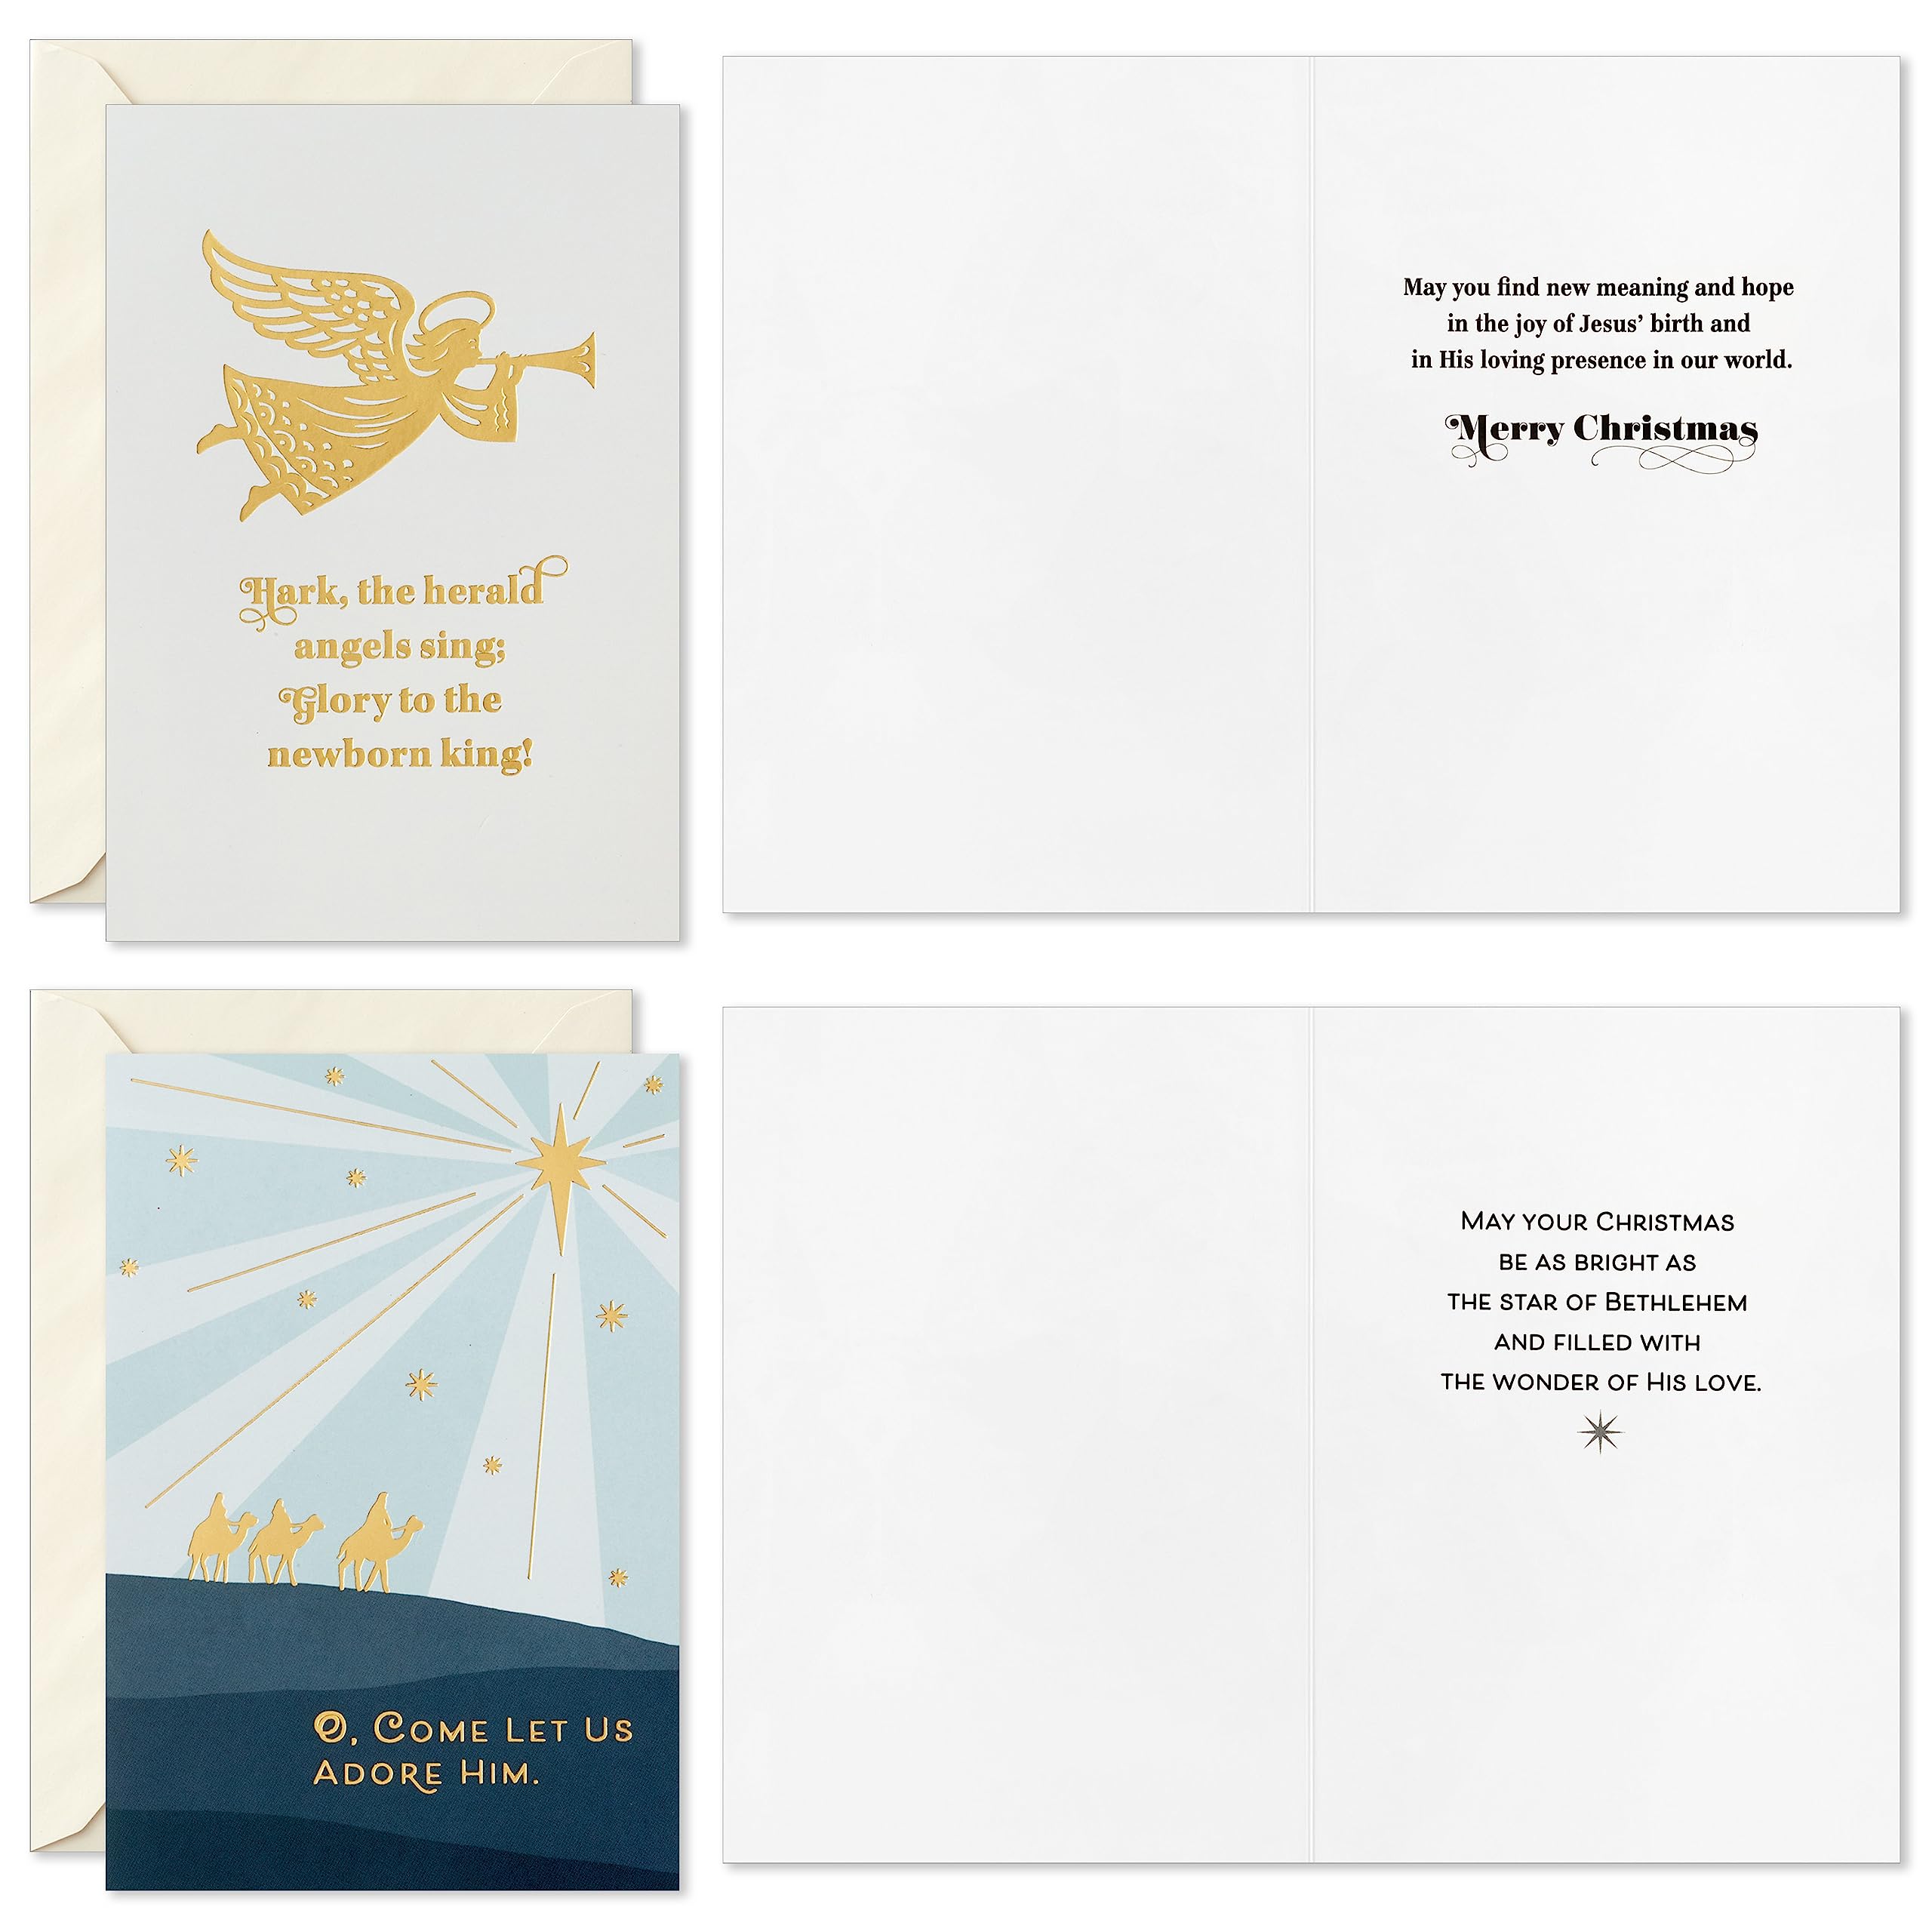 Hallmark Religious Christmas Card Assortment, Heavenly Peace (36 Cards and Envelopes) Dusty Blue and Gold Foil